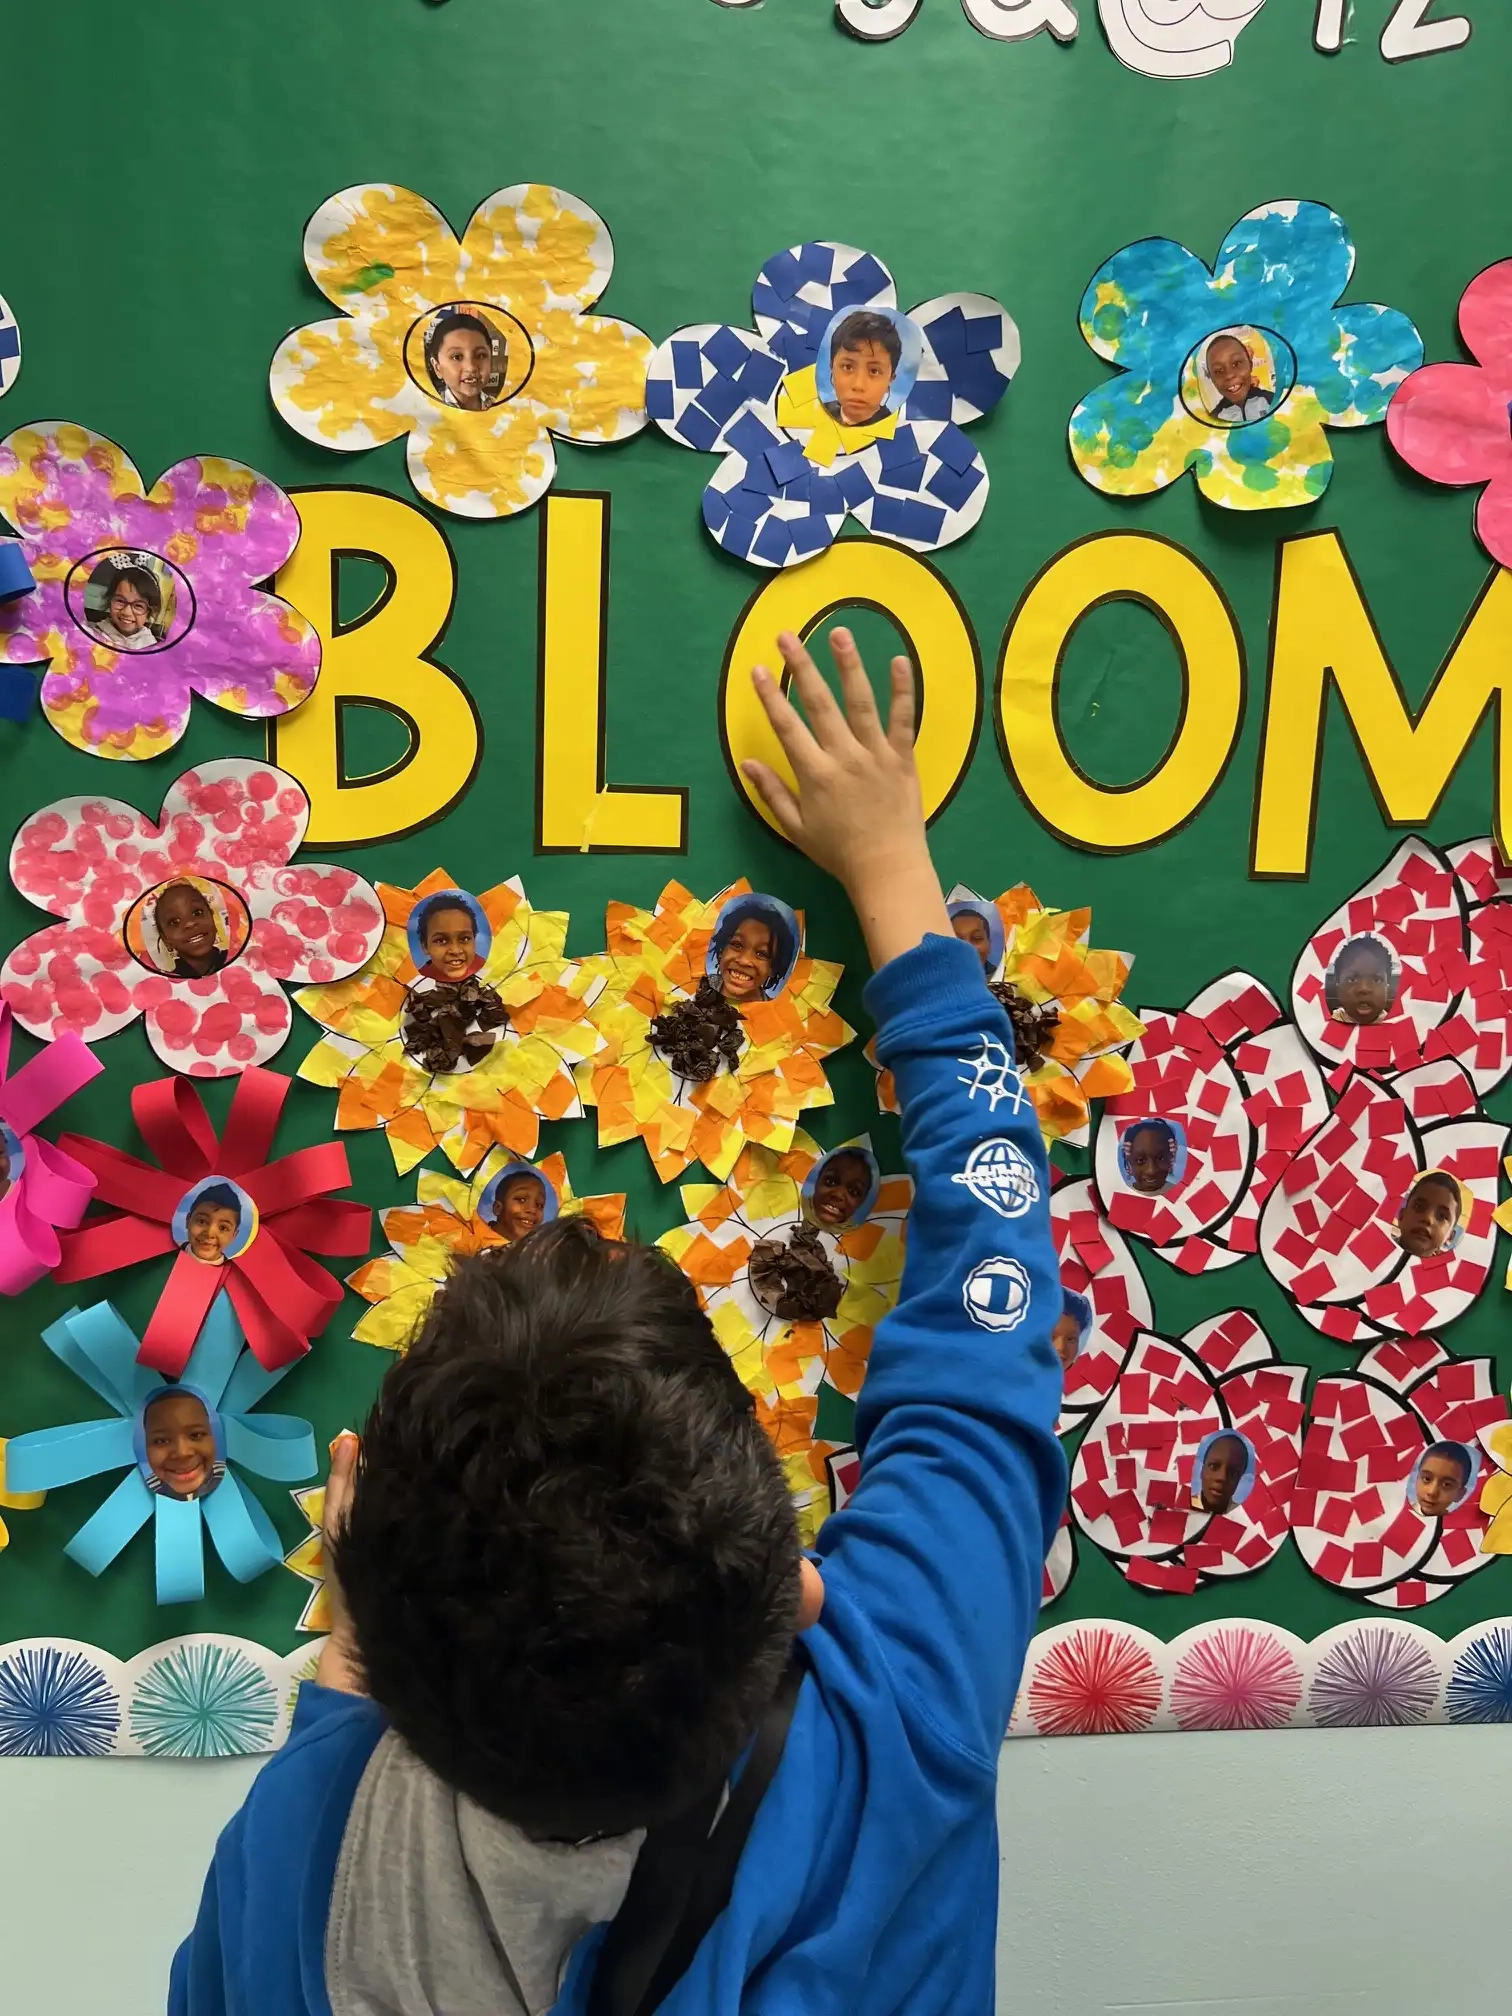 Student putting up the word bloom on a green bulletin board